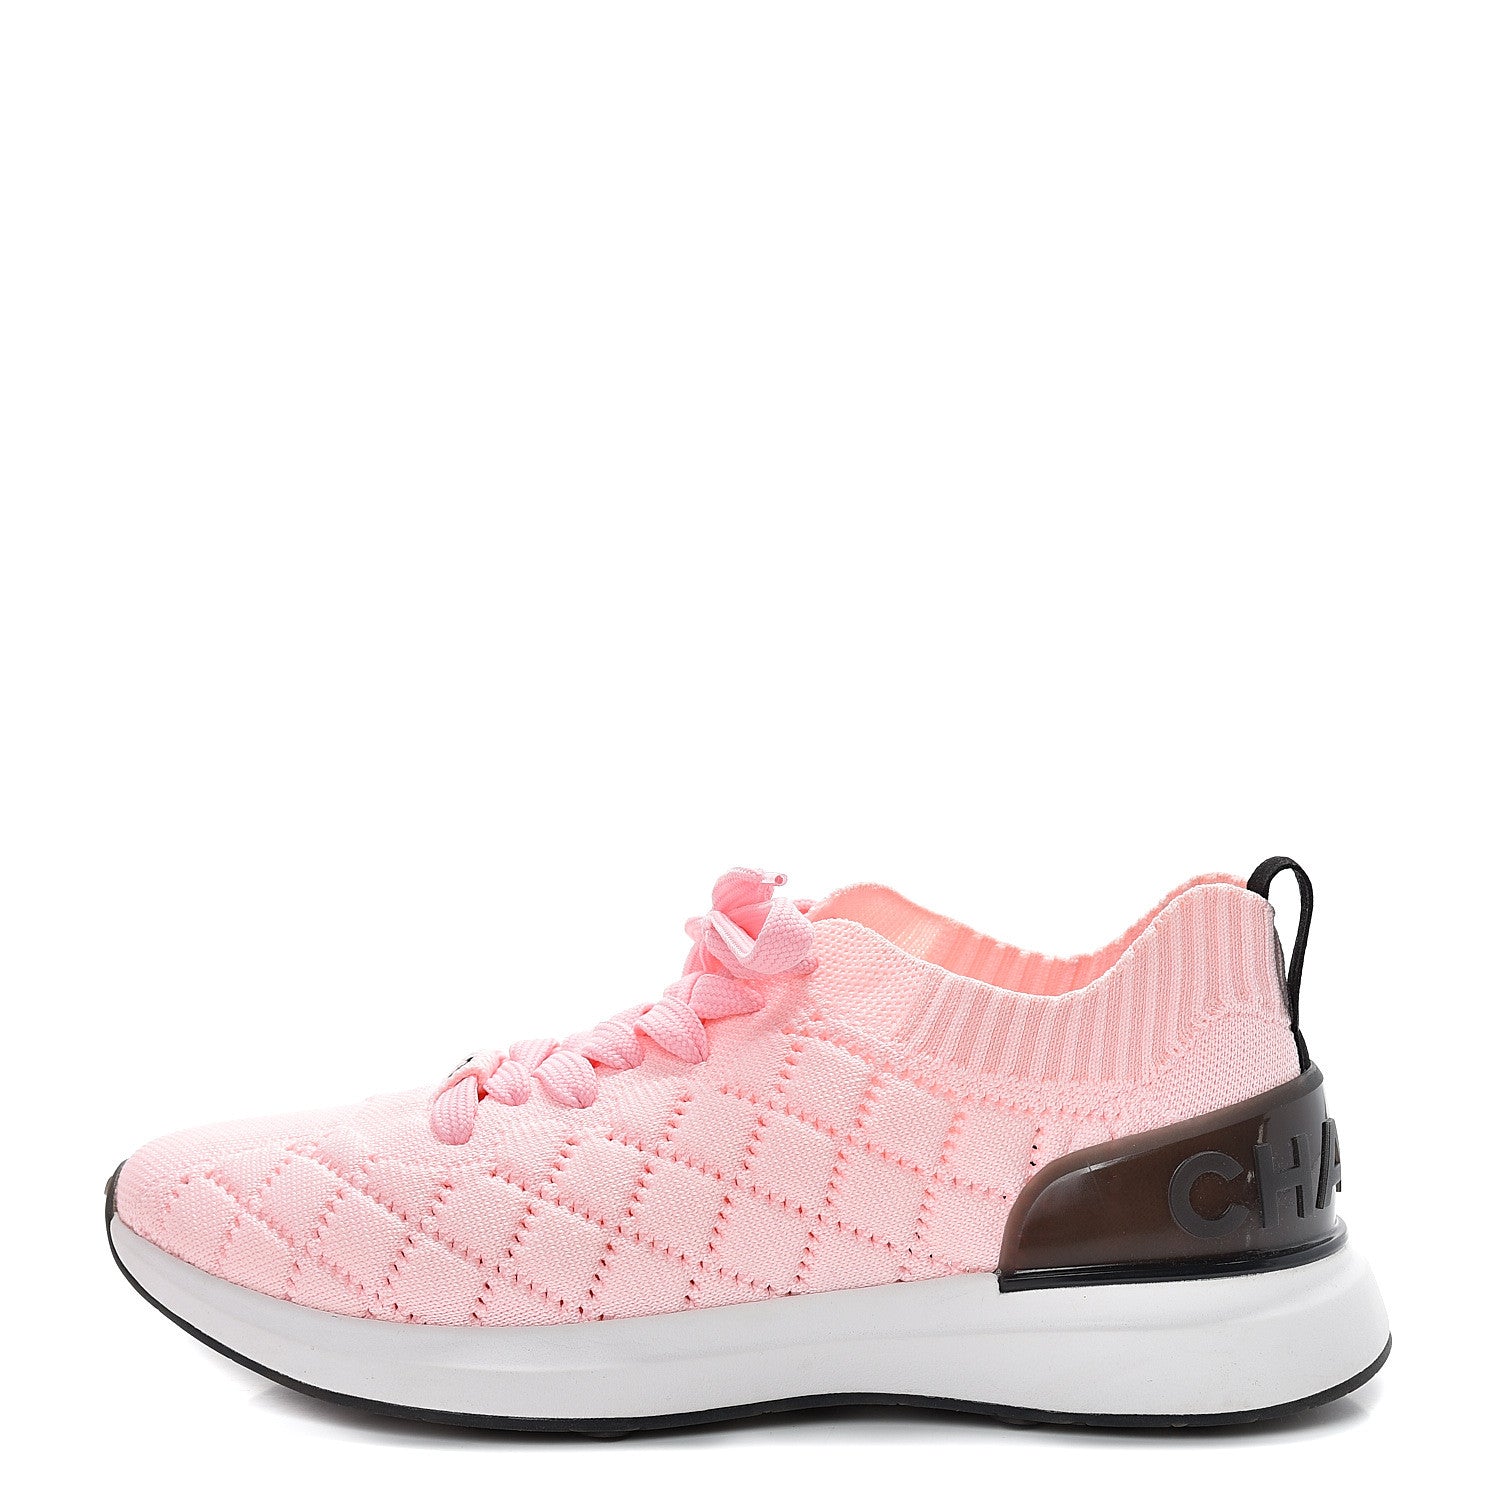 CHANEL, Shoes, Chanel Fabric Knit White Sneakers